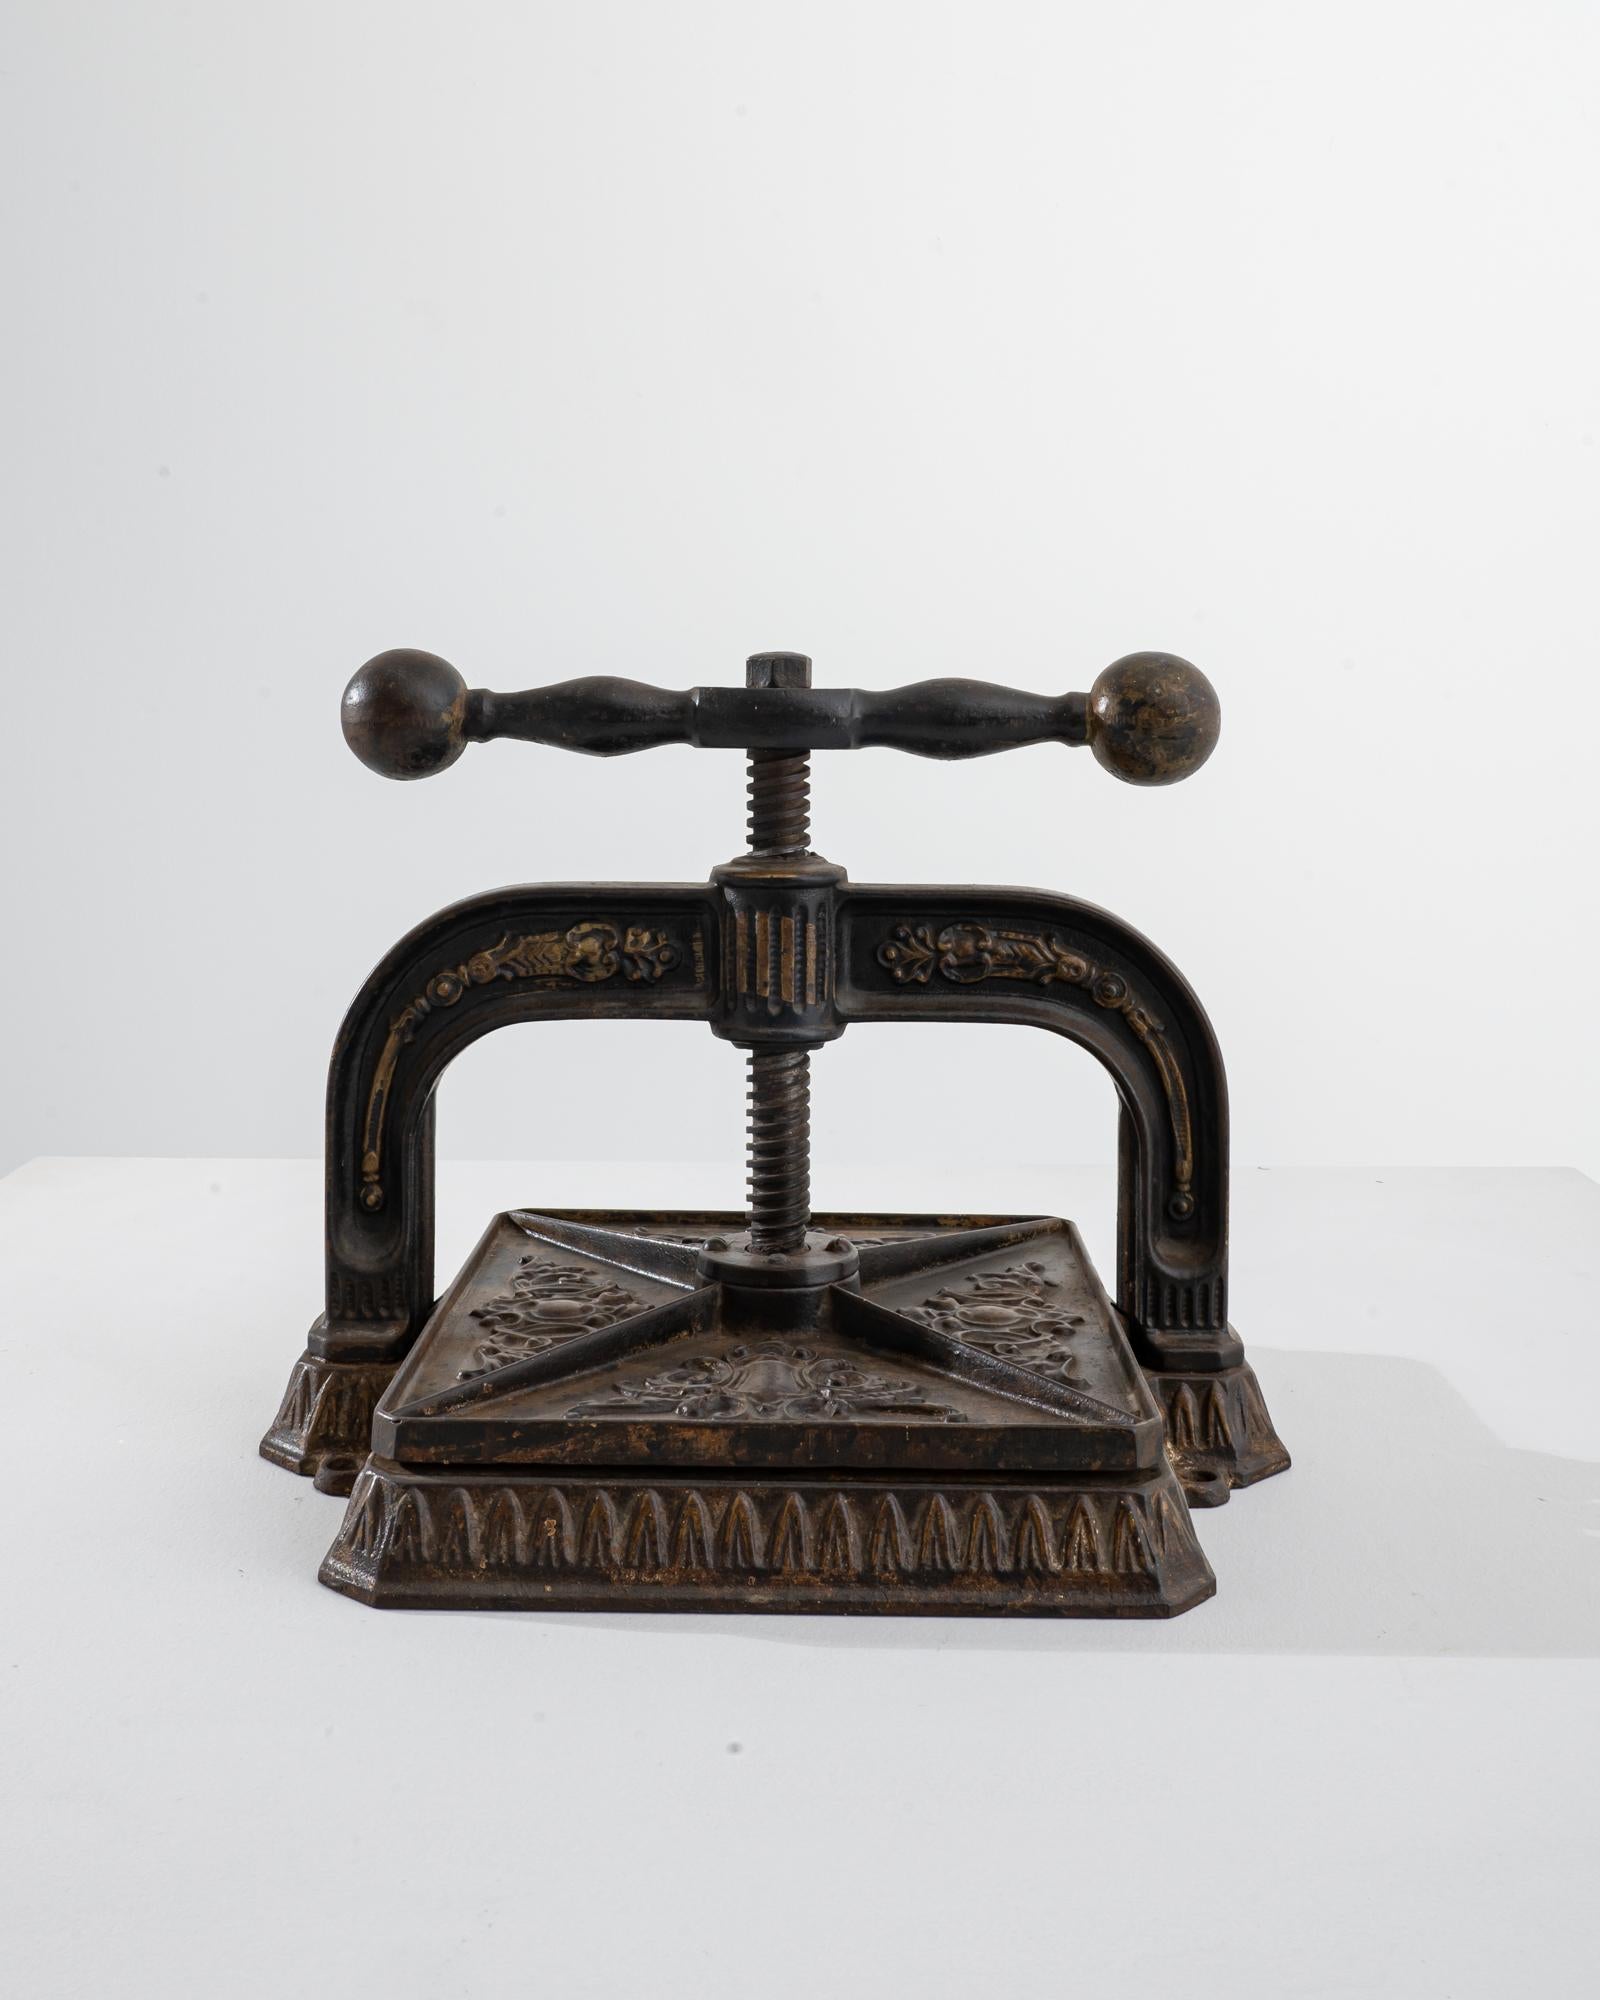 A cast iron press from 1900s France. Originally purposed as a book-binding press used in such places as banks or libraries, this unique antiquity suggests a niche function, while providing a universal visual appeal. Its cast iron form, speckled with